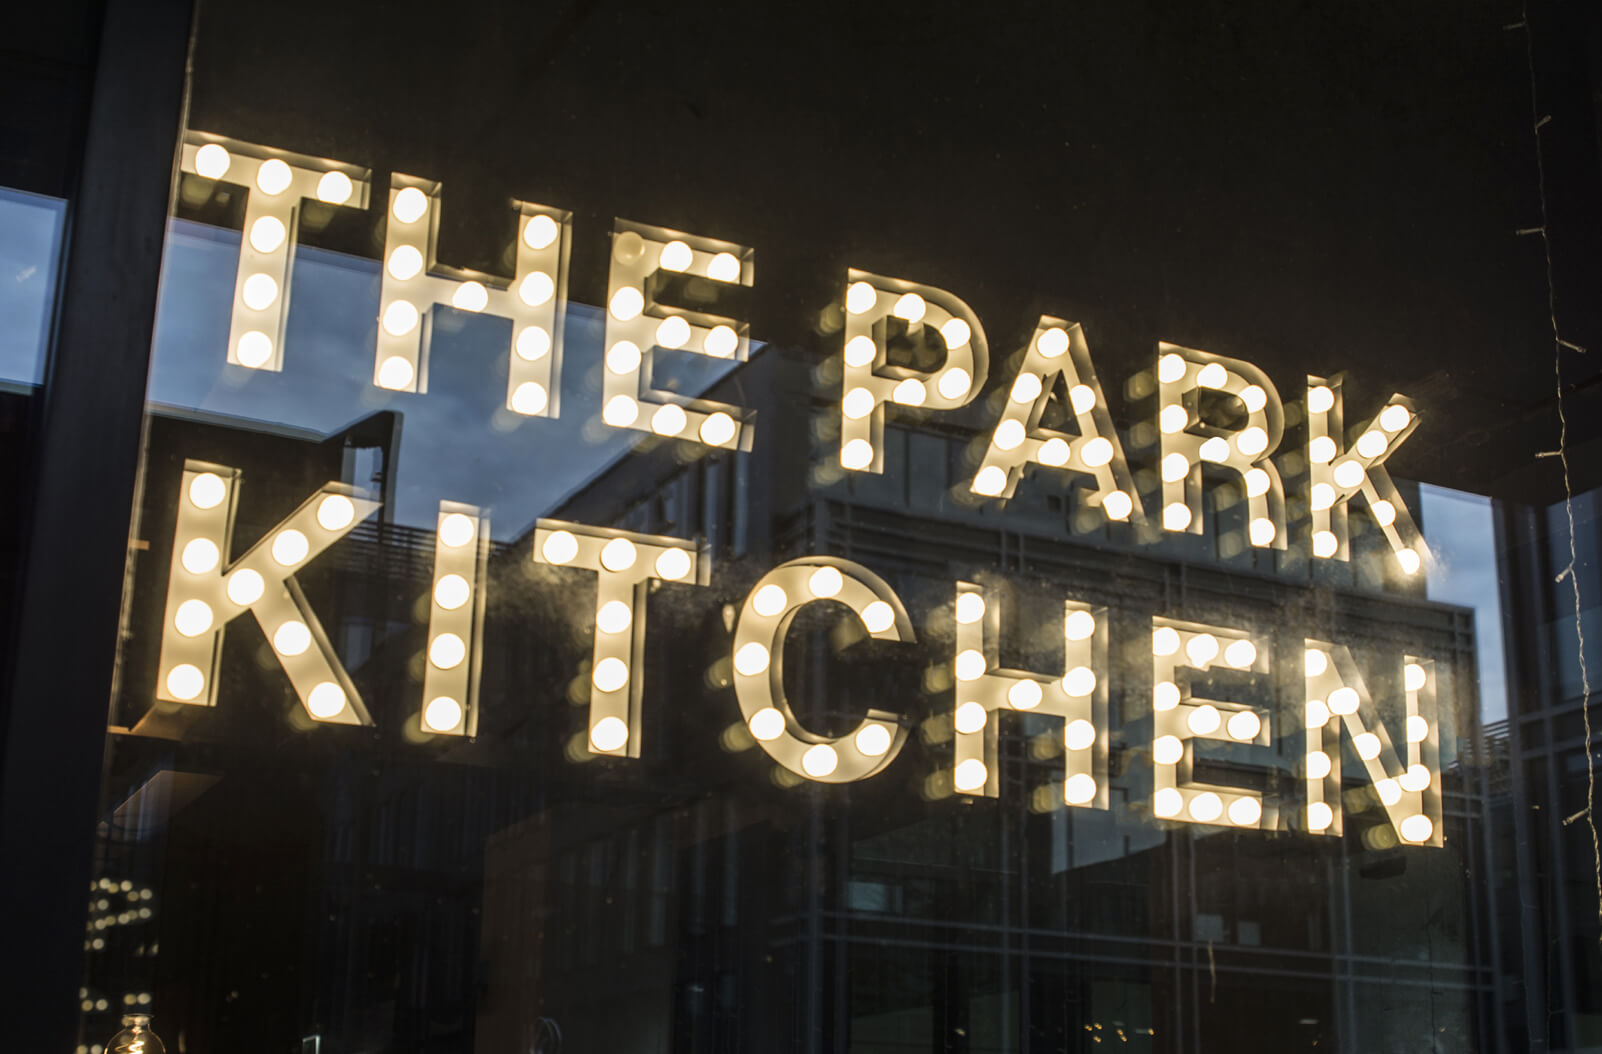 The Park Kitchen - The Park Kitchen - small letters with bulbs placed behind the glass